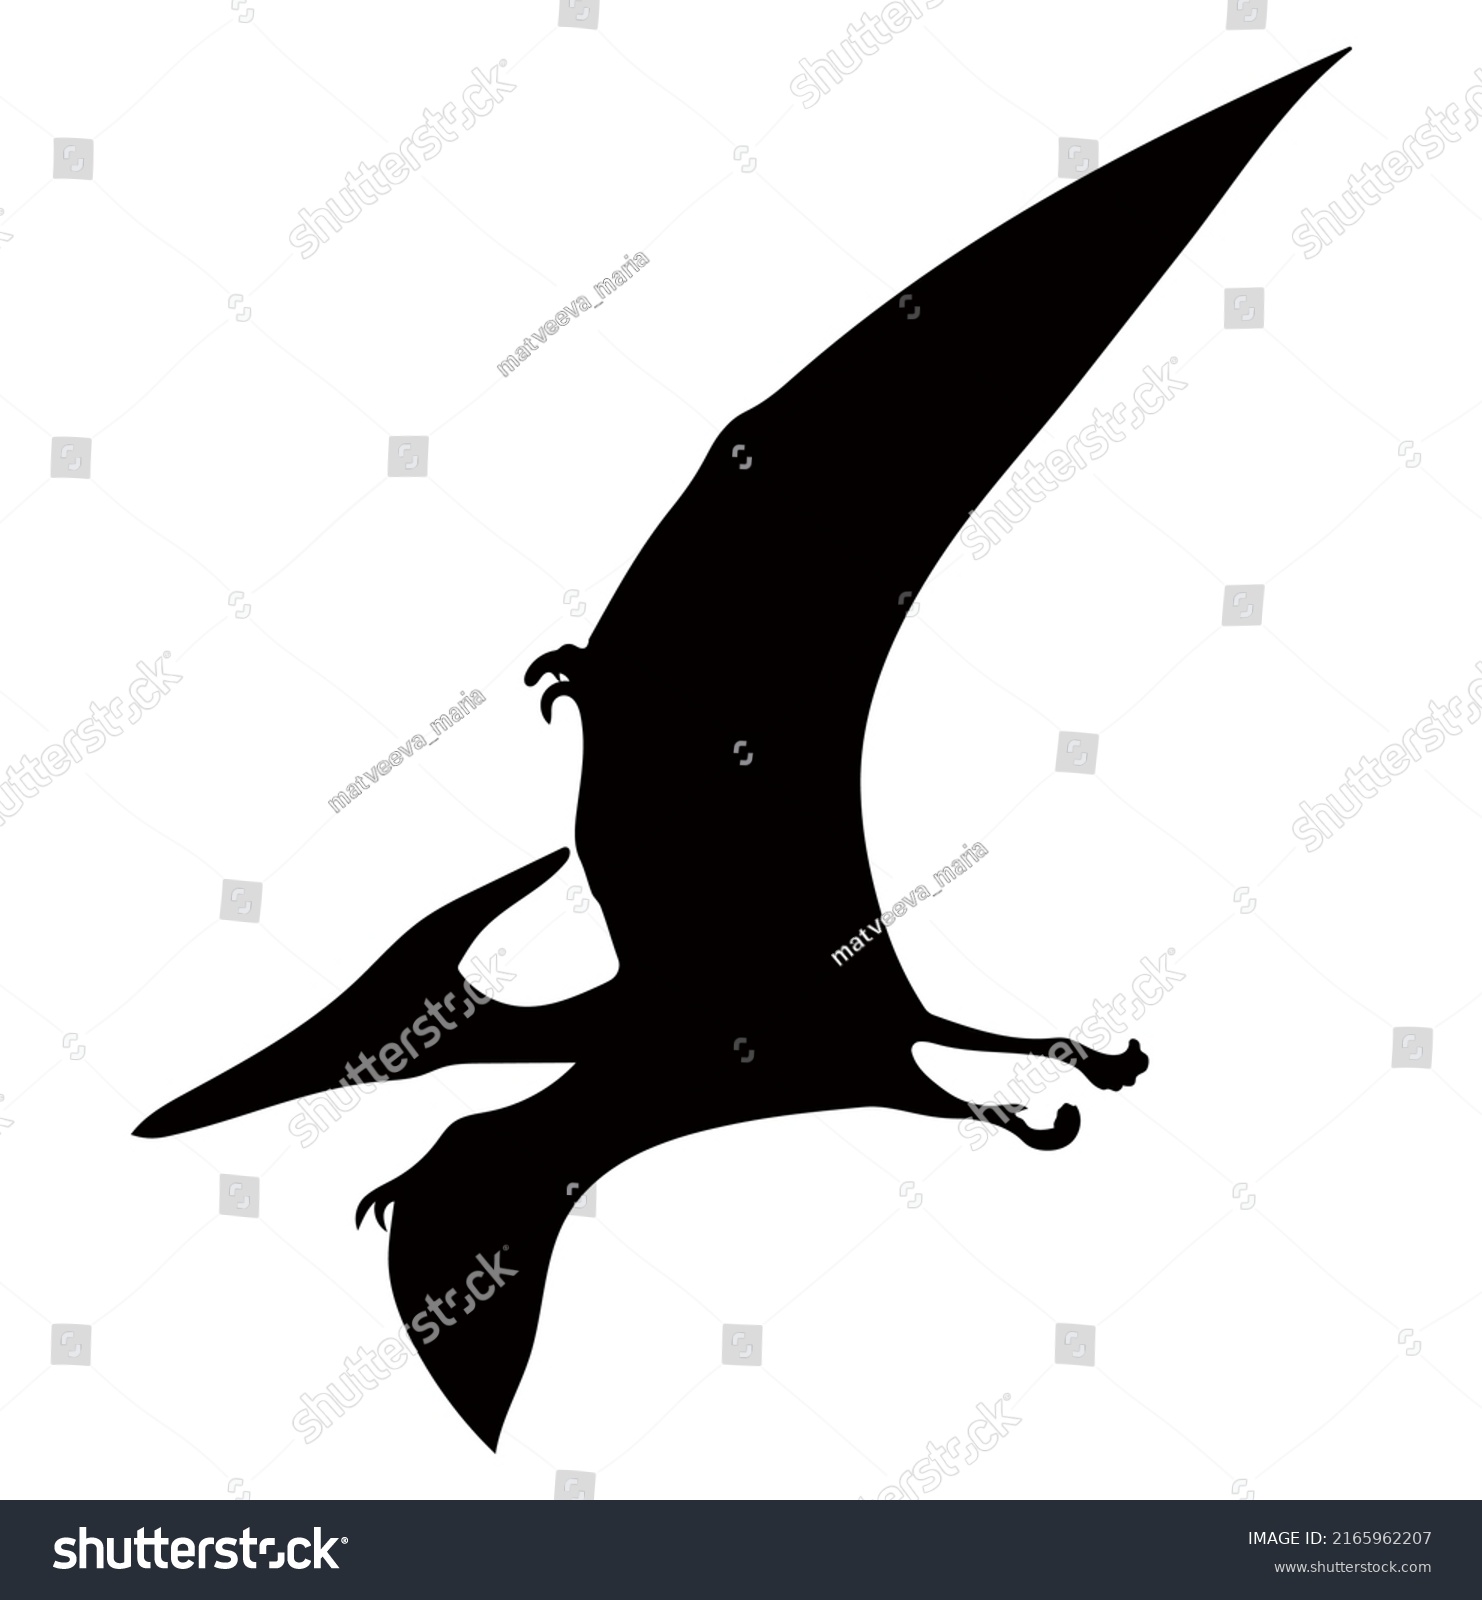 SVG of The silhouette of a dinosaur. Vector illustration isolated on a white background. Dinosaurs of the Jurassic period. svg